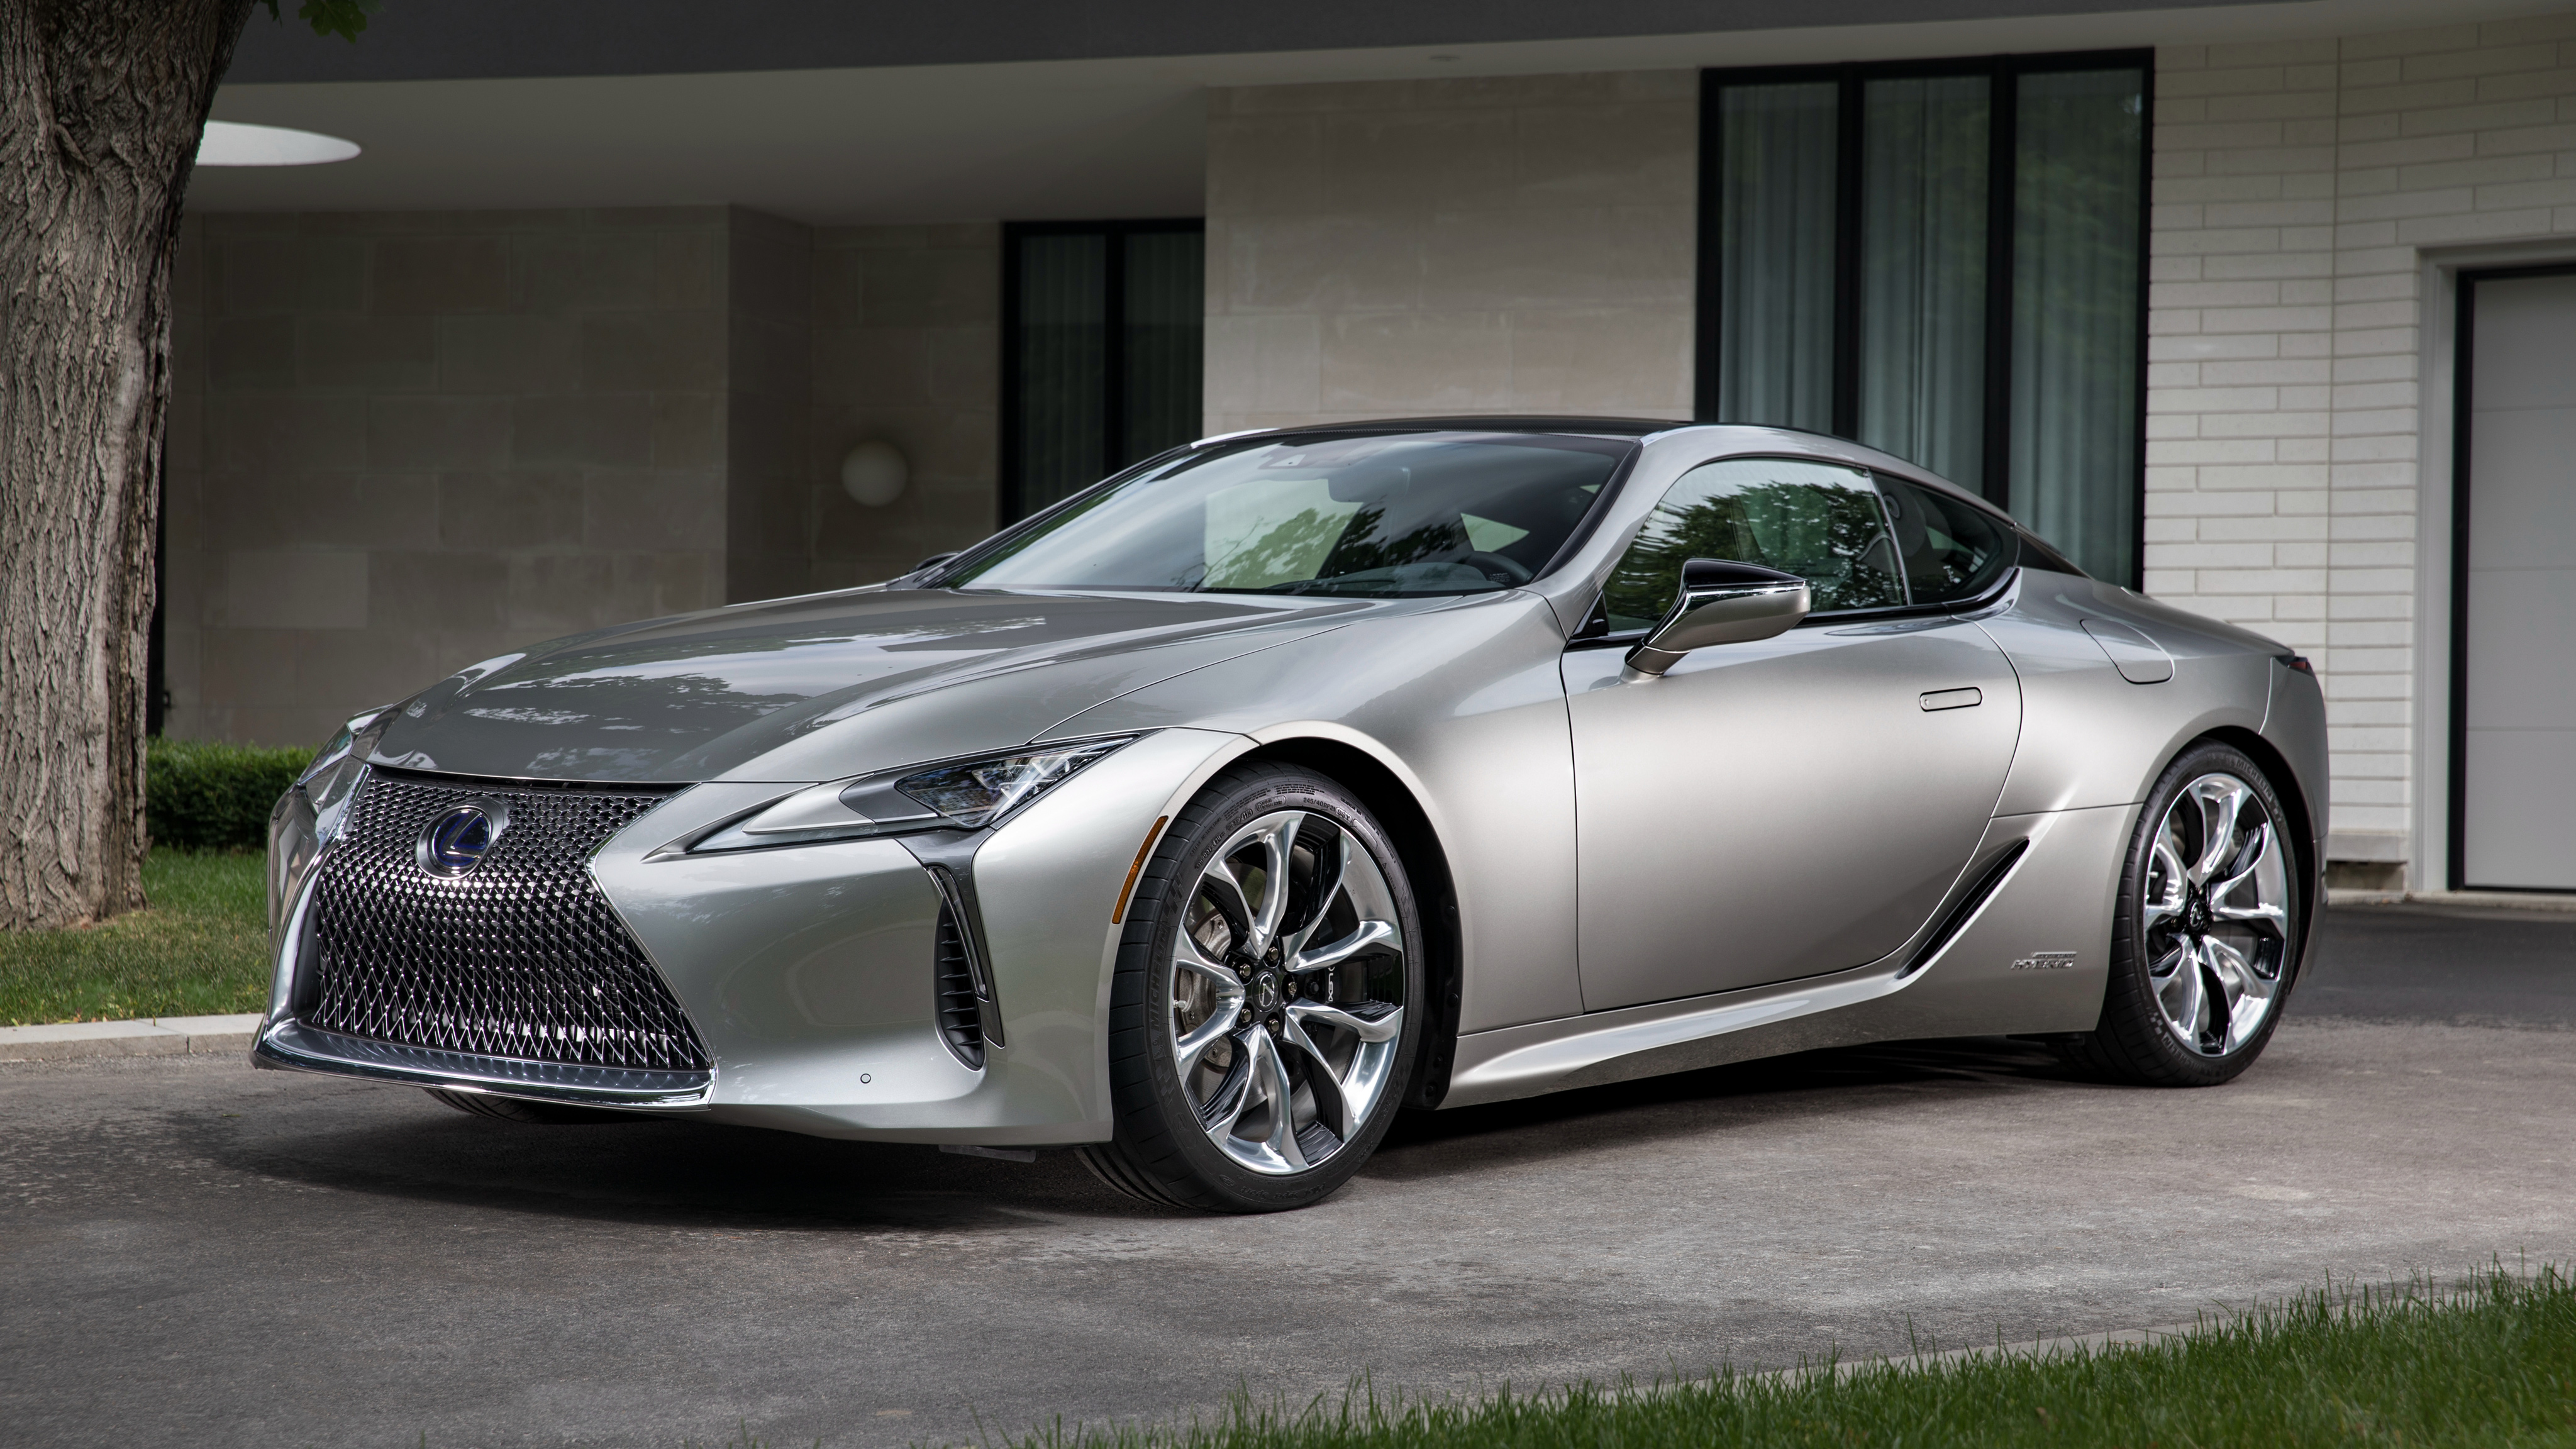 Stylish silver car Lexus LC 500h, 2018 wallpapers and images